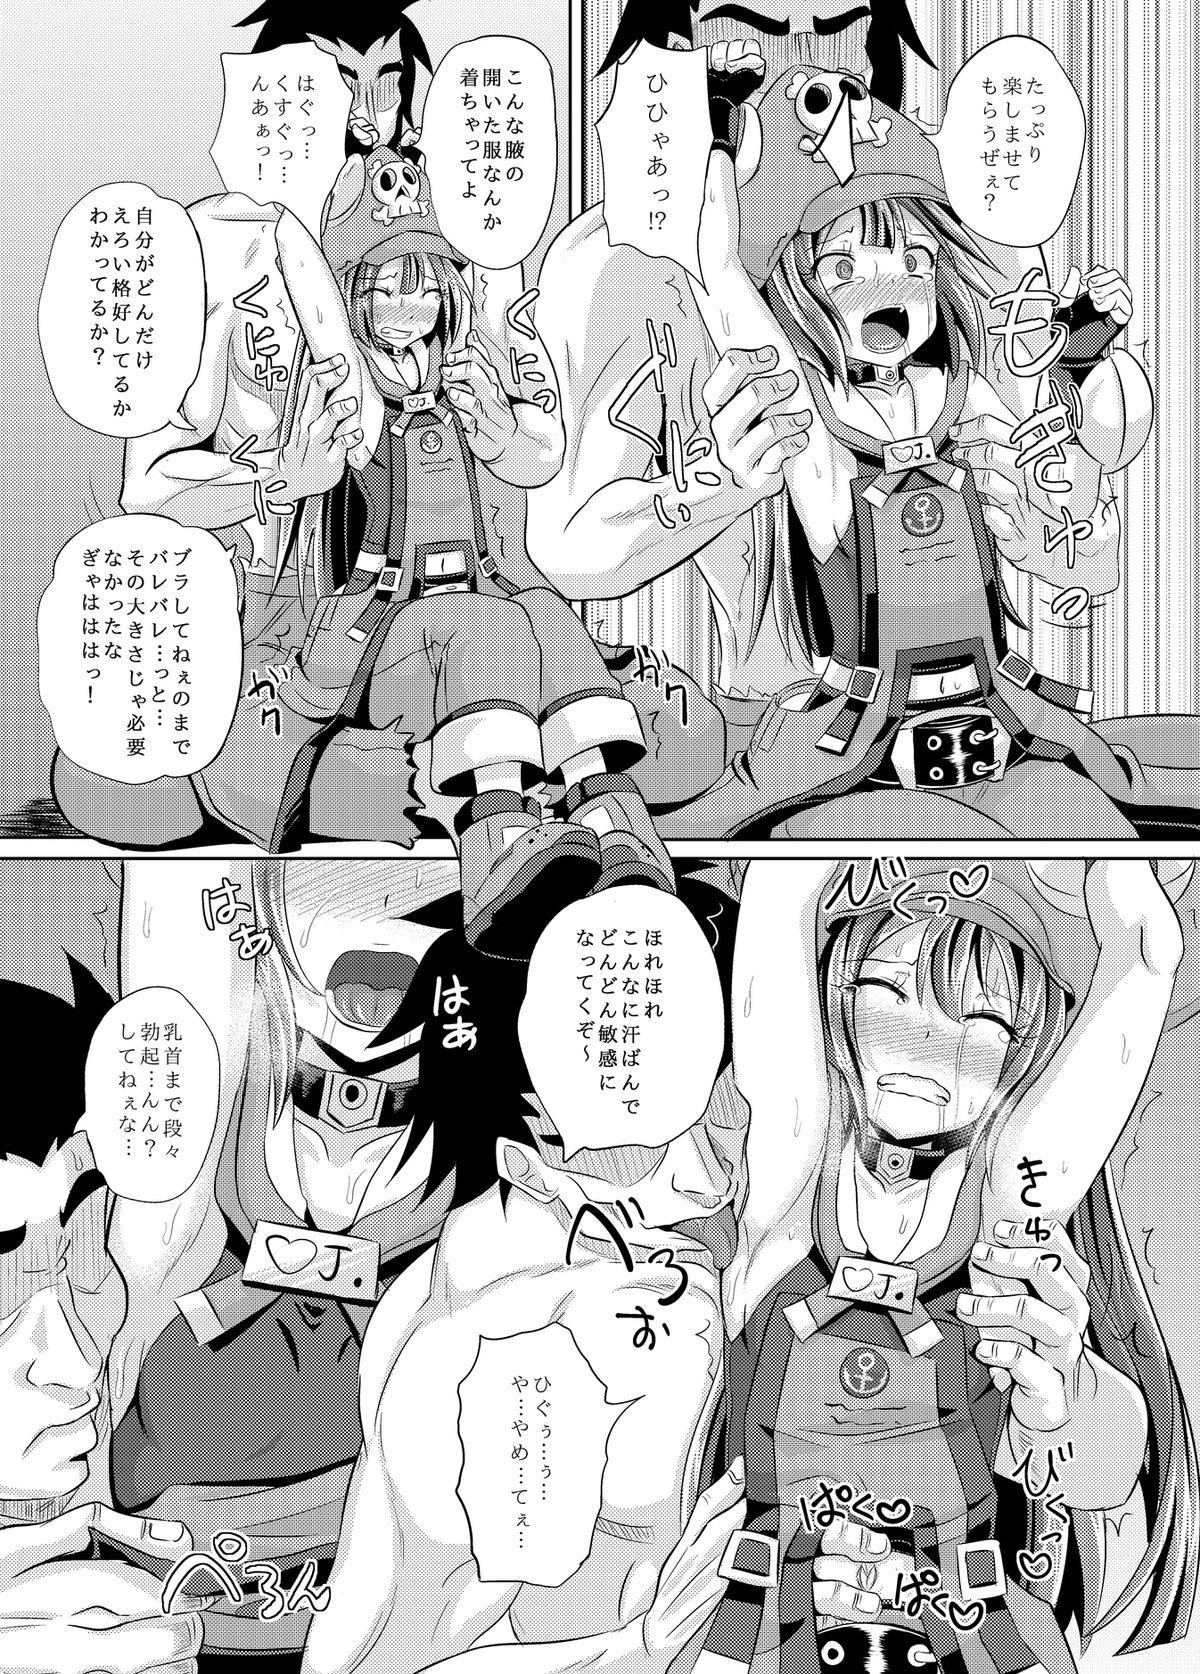 Big Black Dick May-chan Battle Arena - Guilty gear Gay Blackhair - Page 8